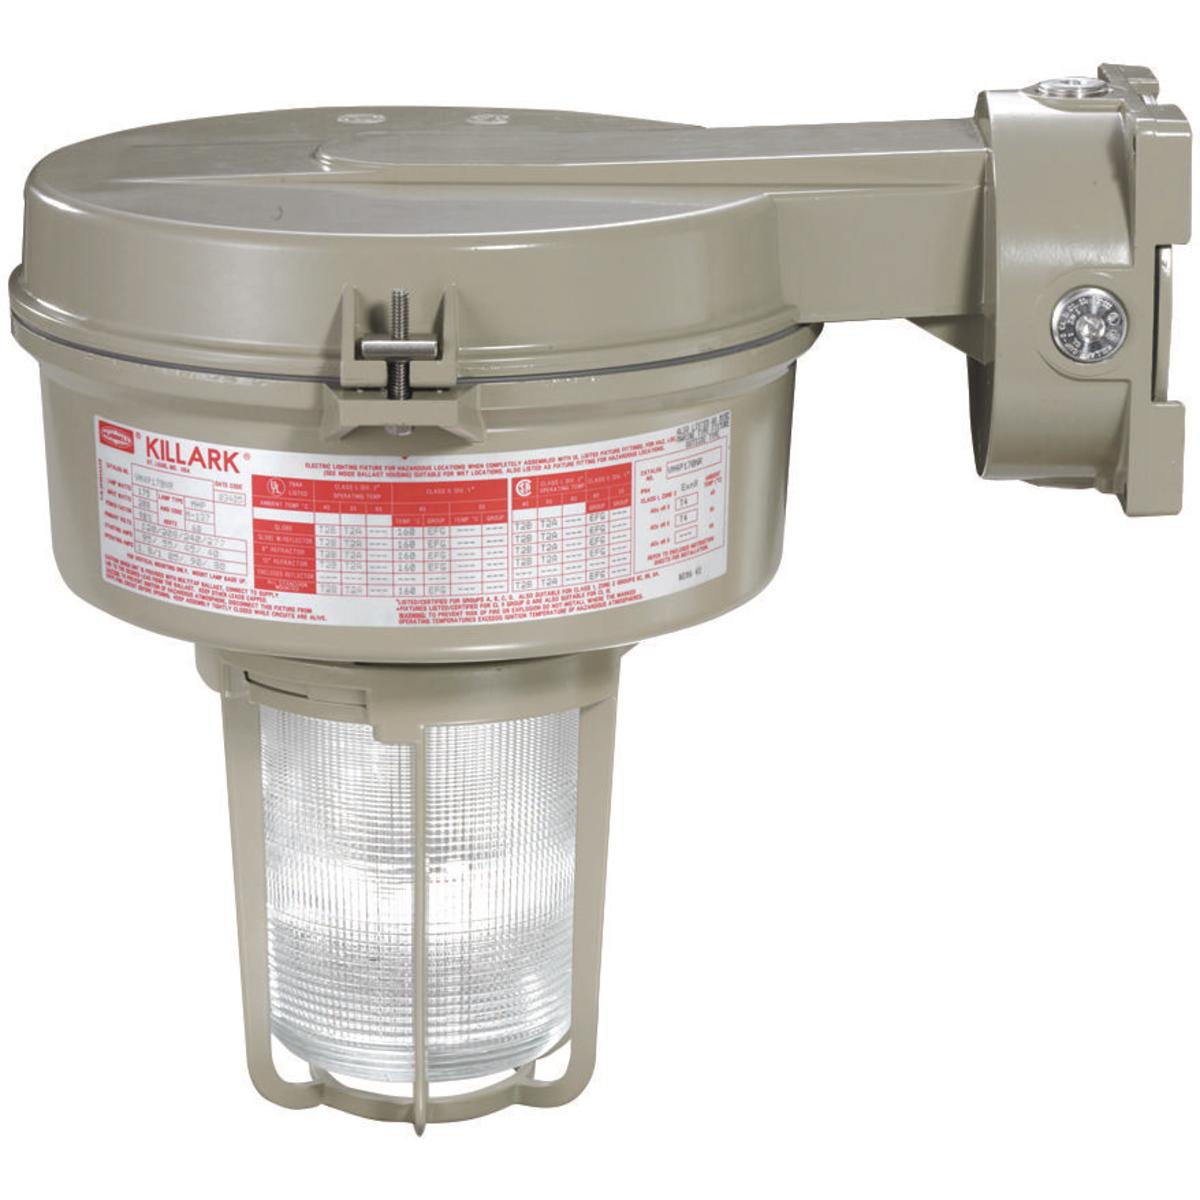 Hubbell VM3P150B2R1G VM3 Series - 150W Metal Halide Quadri-Volt - 3/4" Wall Mount - Type I Glass Refractor and Guard  ; Ballast tank and splice box – corrosion resistant copper-free aluminum alloy with baked powder epoxy/polyester finish, electrostatically applied for complet